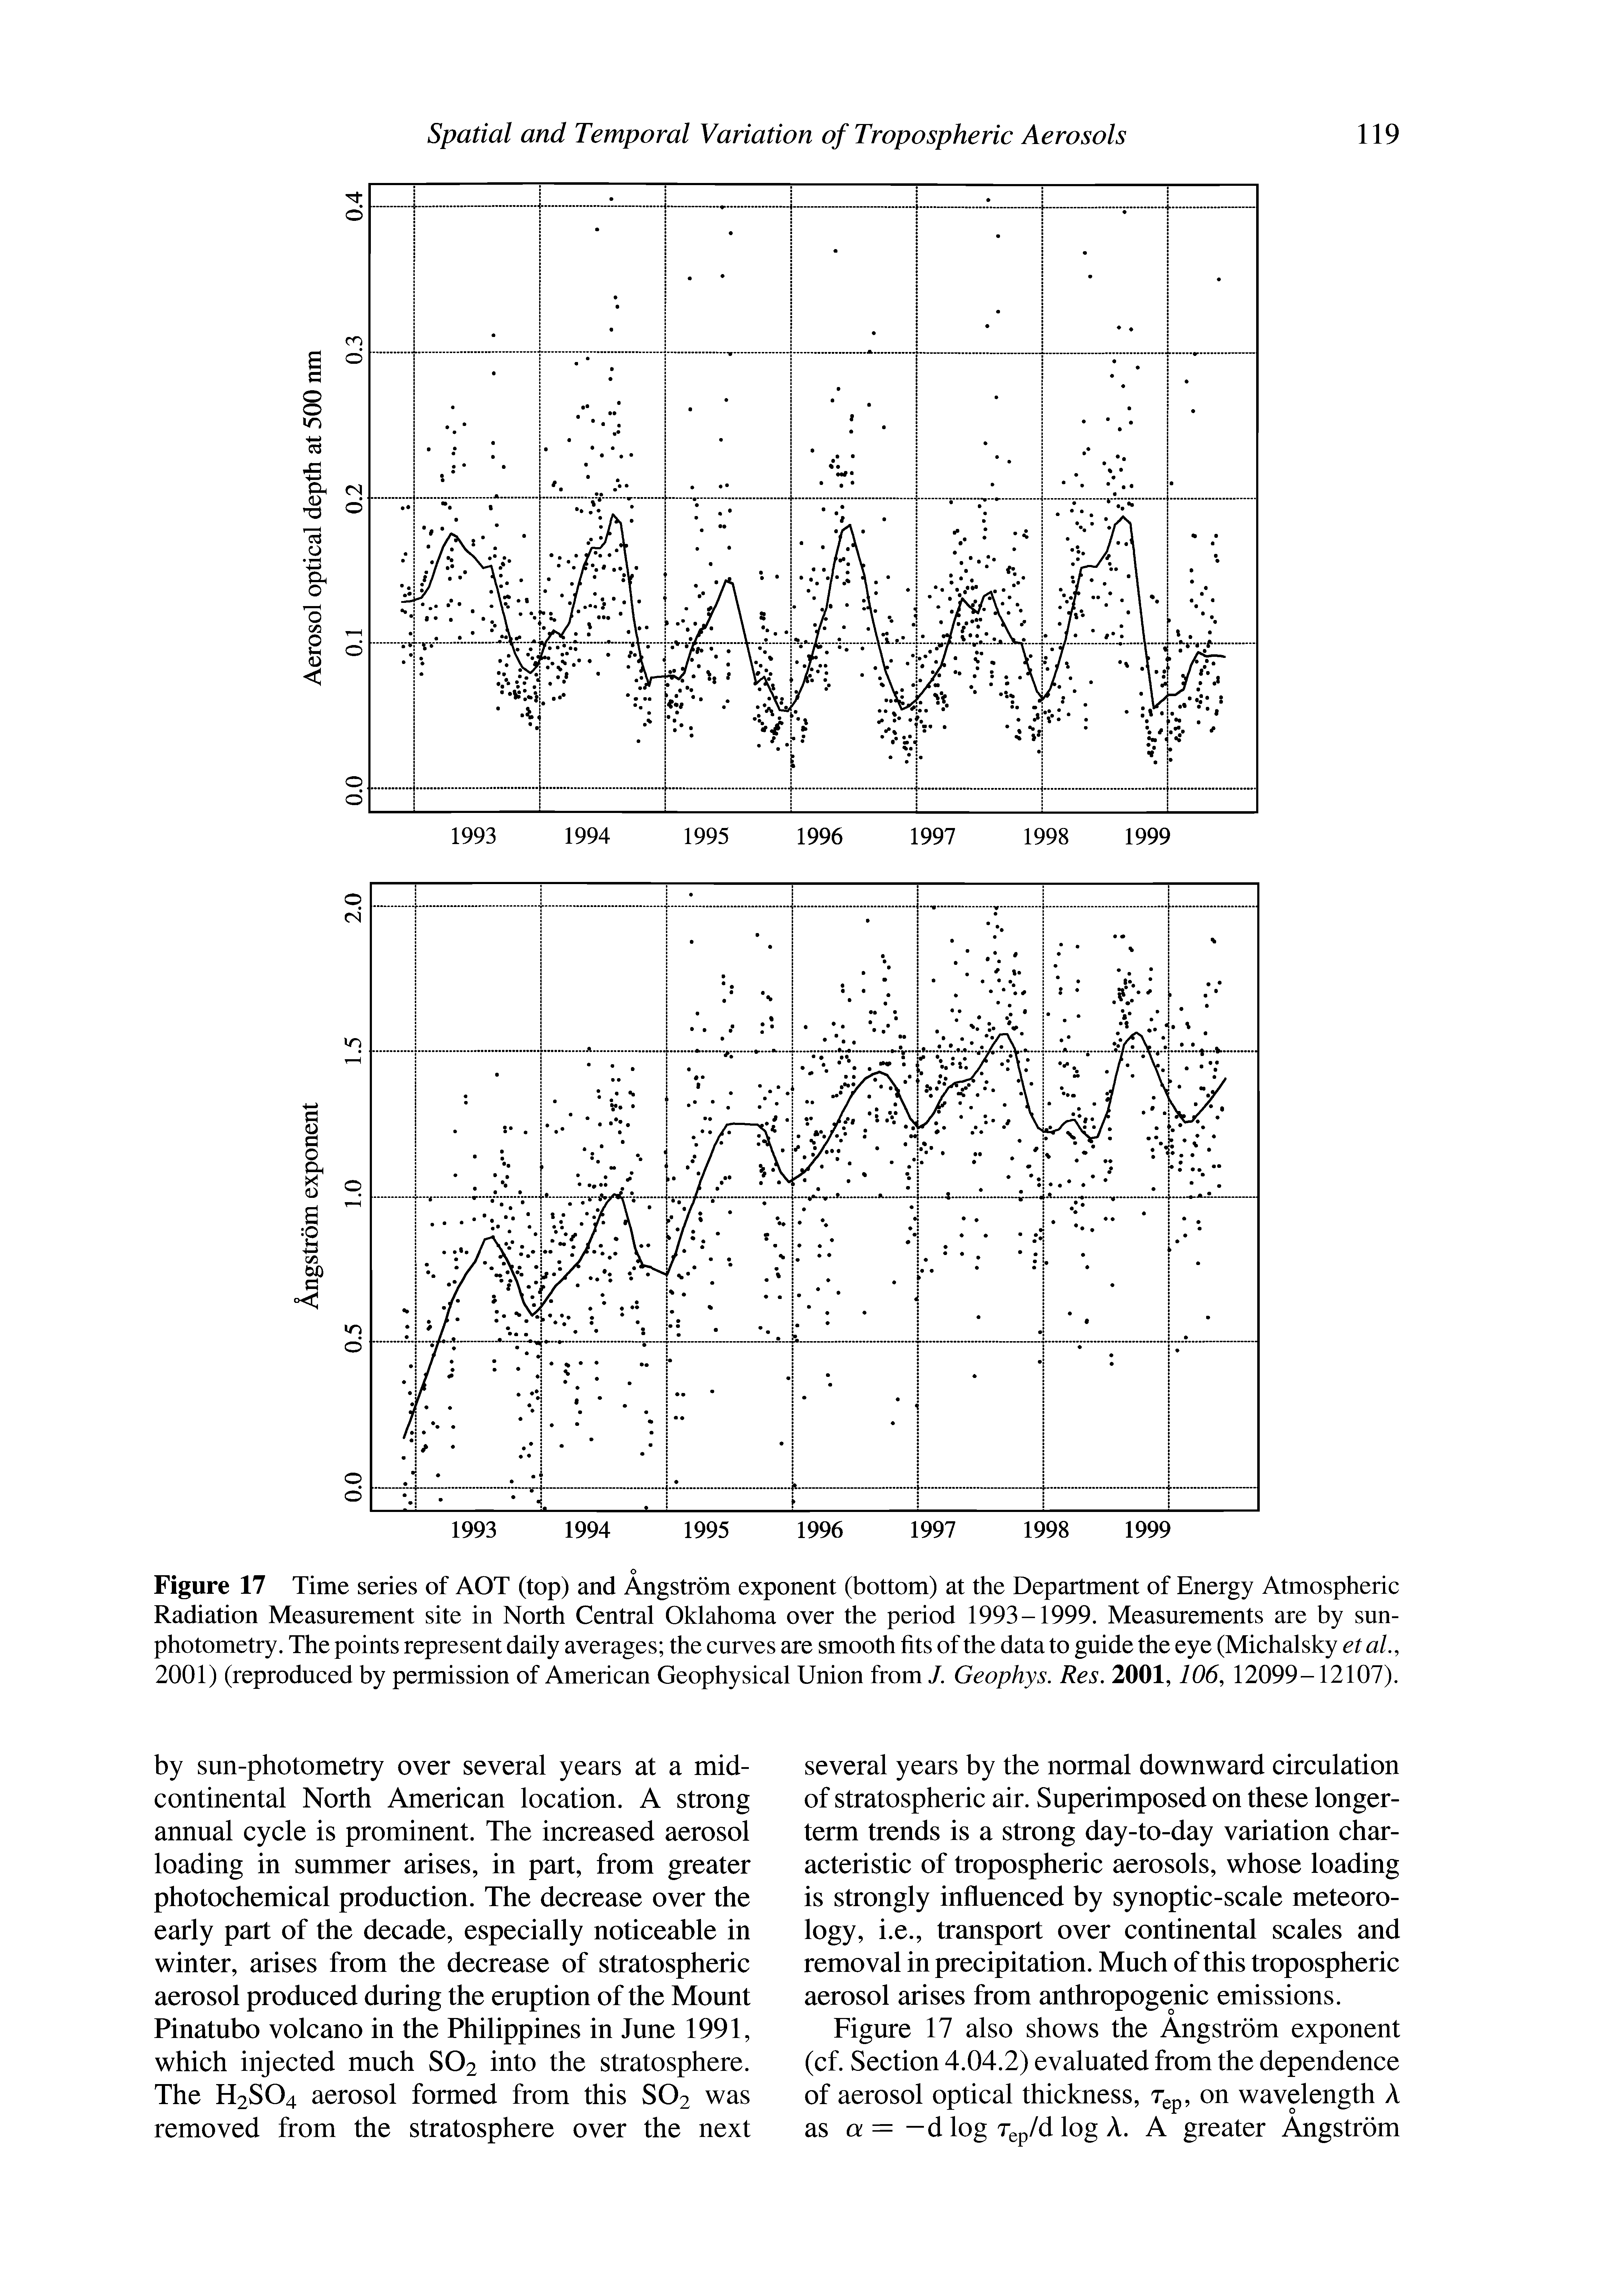 Figure 17 Time series of AOT (top) and Angstrom exponent (bottom) at the Department of Energy Atmospheric Radiation Measurement site in North Central Oklahoma over the period 1993-1999. Measurements are by sun-photometry. The points represent daily averages the curves are smooth fits of the data to guide the eye (Michalsky et aL, 2001) (reproduced by permission of American Geophysical Union from /. Geophys. Res. 2001,106, 12099-12107).